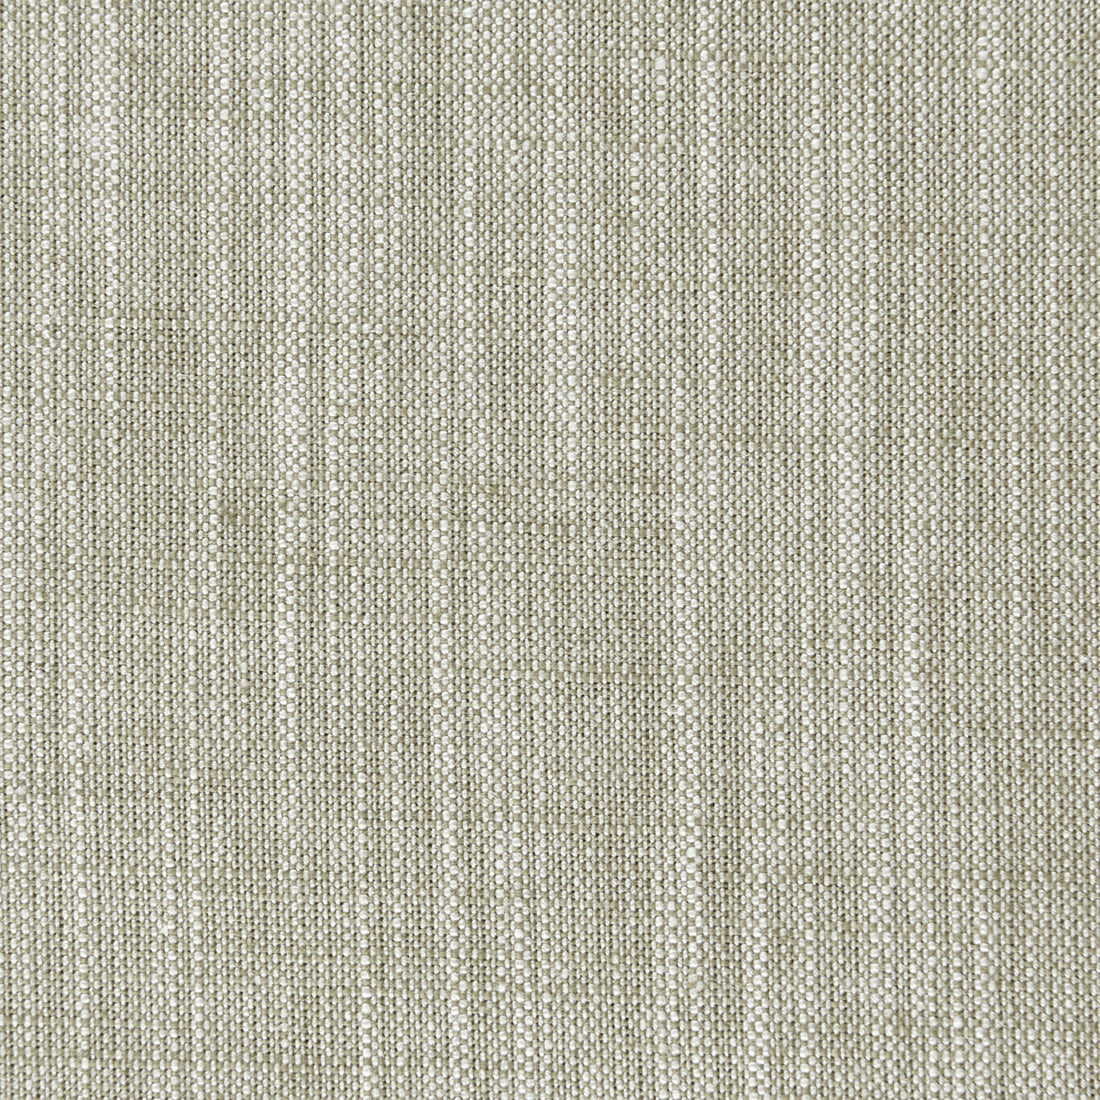 Biarritz fabric in putty color - pattern F0965/37.CAC.0 - by Clarke And Clarke in the Clarke &amp; Clarke Biarritz collection